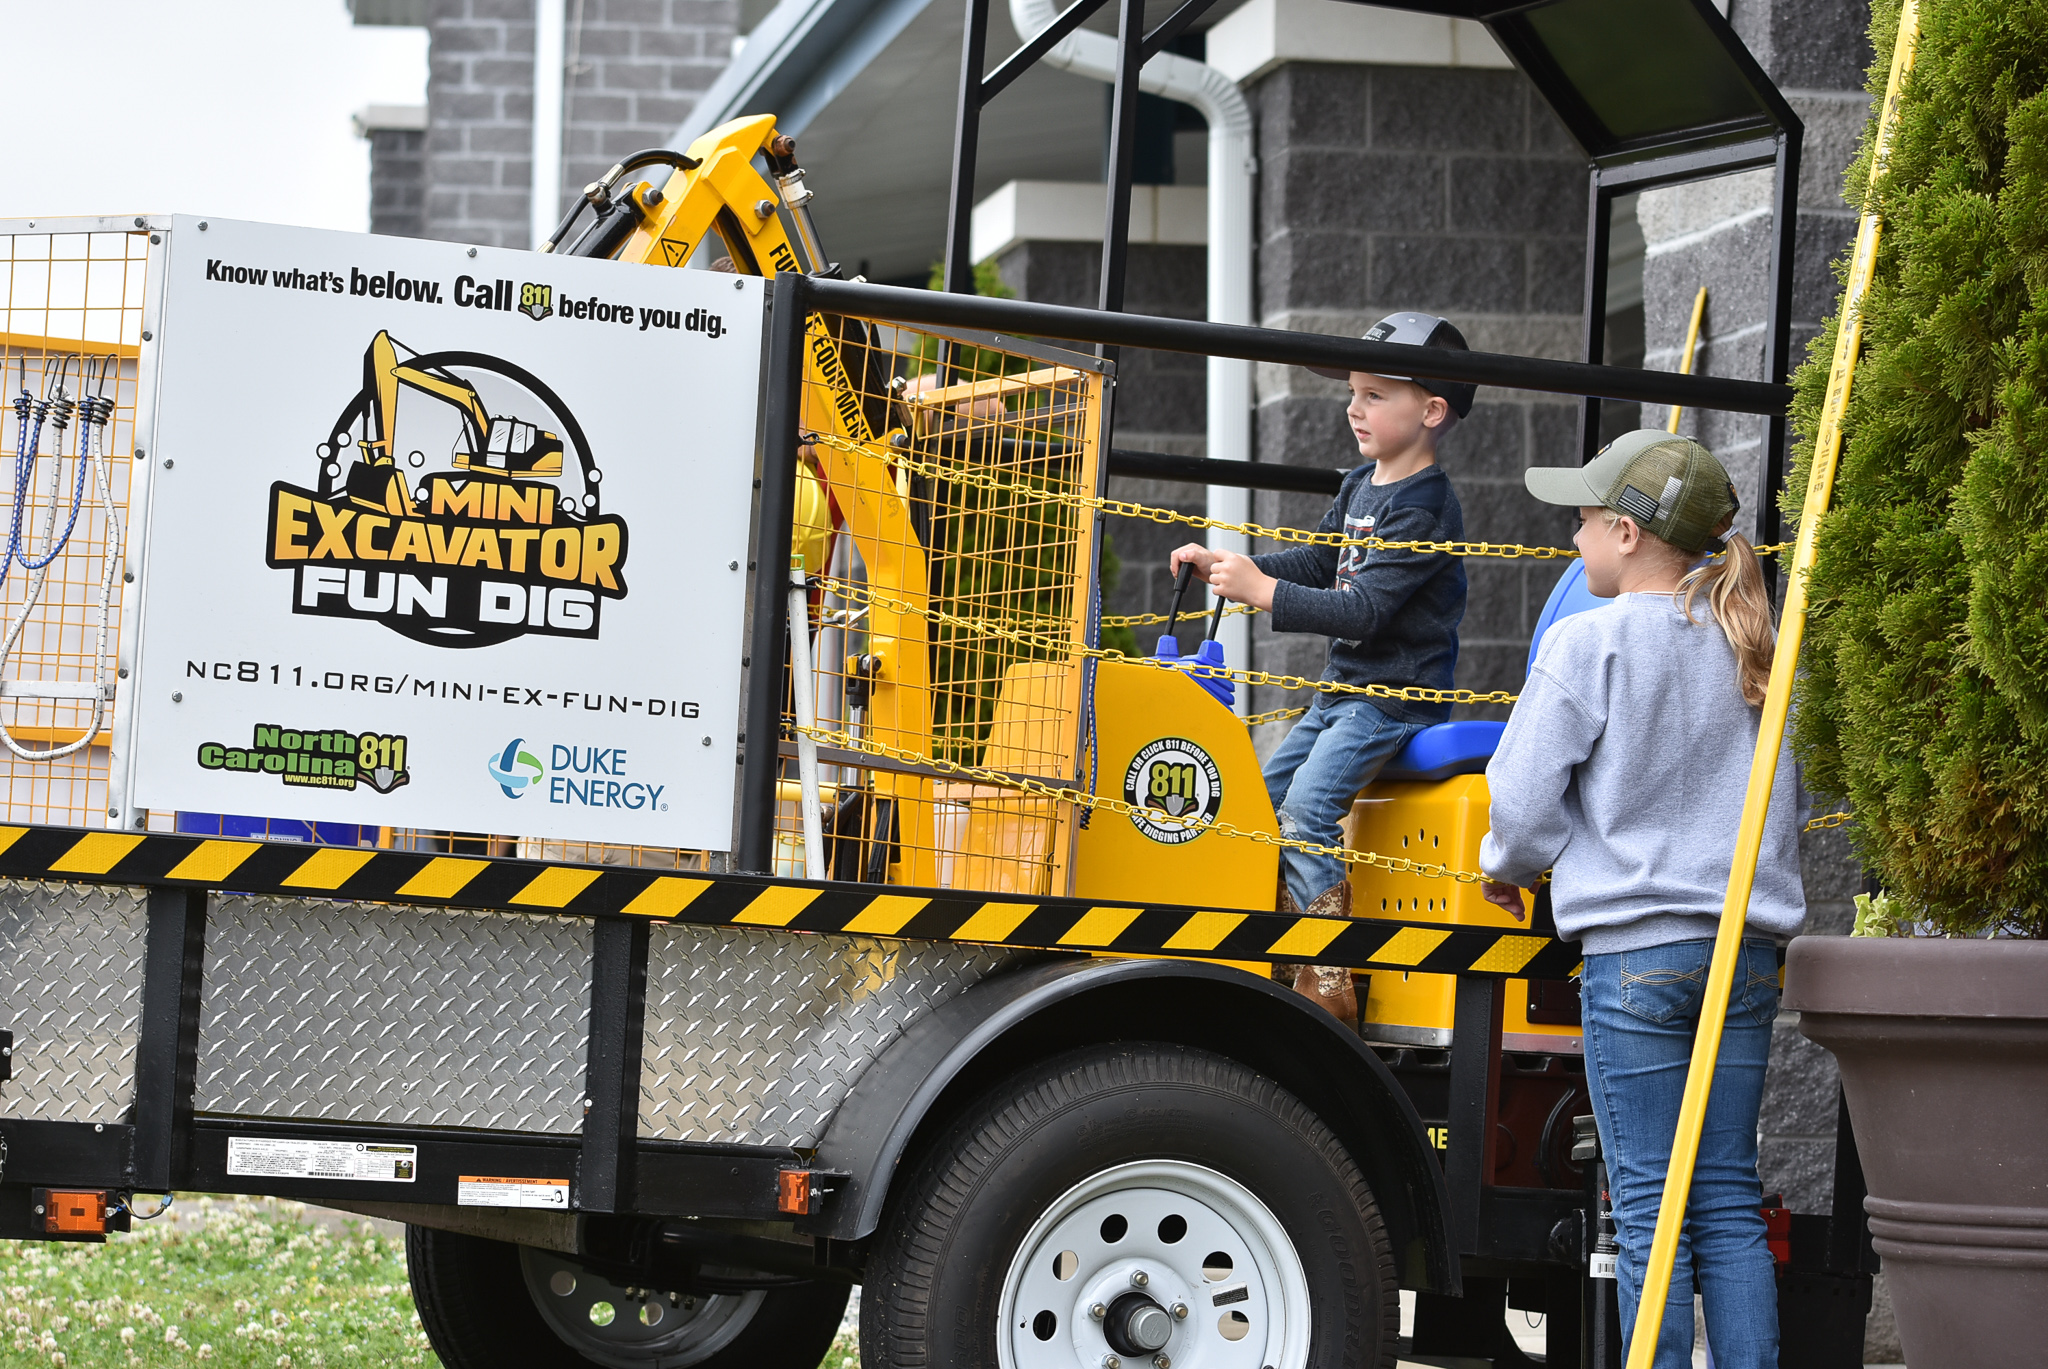 NC811 brought the Mini Excavator Fun Dig for the kids to have the opportunity to run some big equipment.